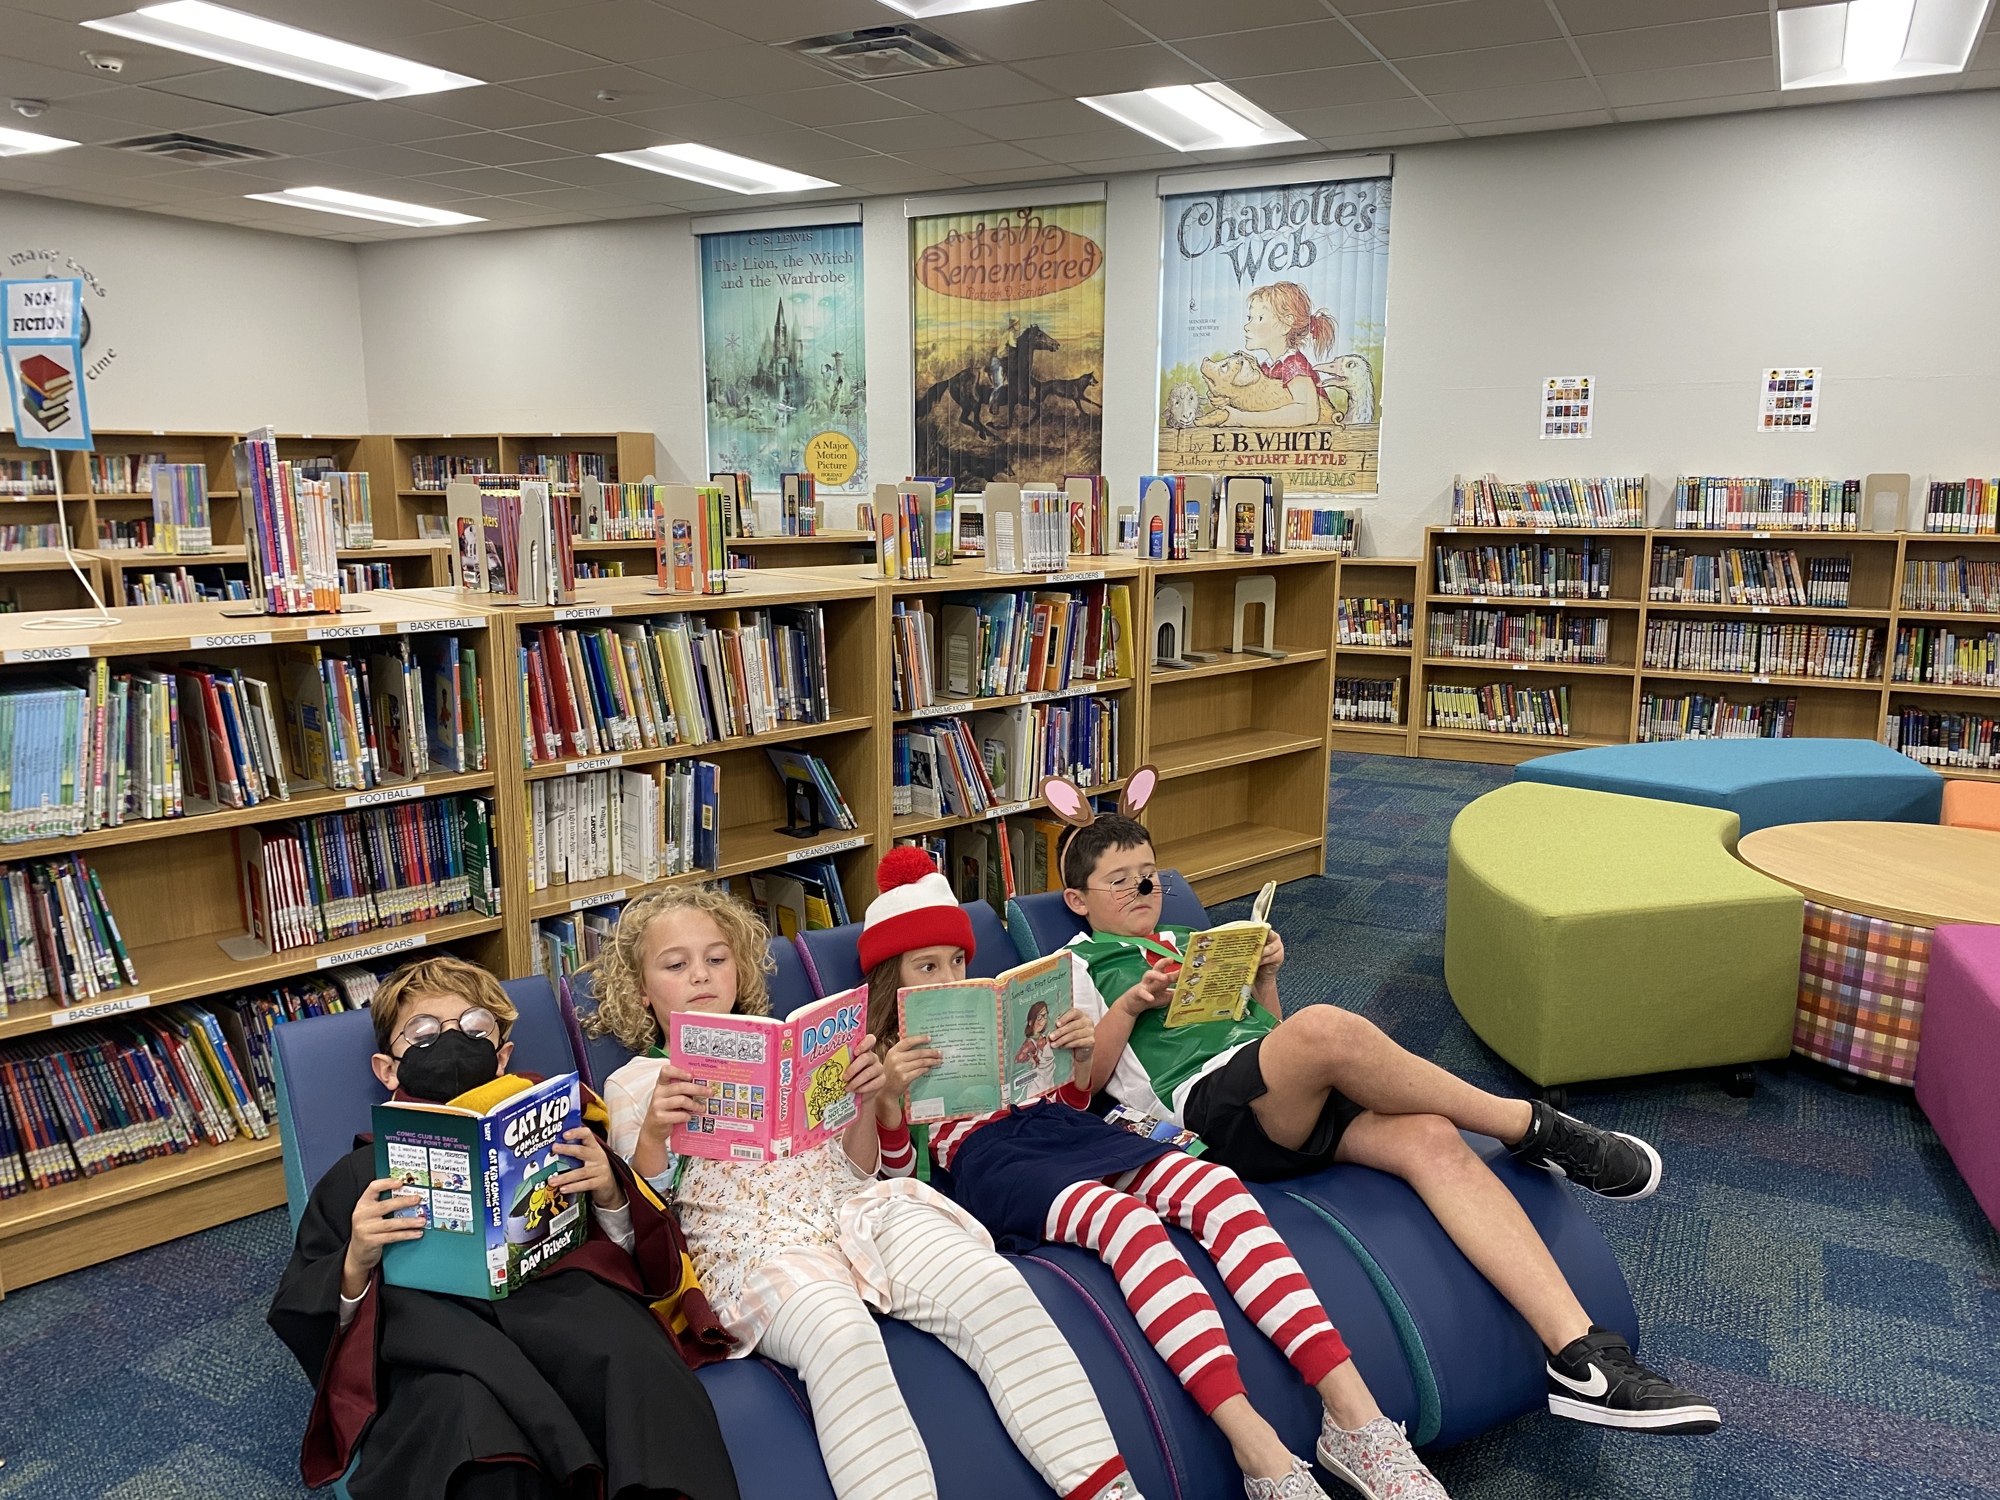 Gene Witt Elementary School students Jack Laubacker, Juliana  Grosso, Lily Fouche and Logan Morton read while resting in a rocker, which is one of the flexible seating options. Courtesy photo.